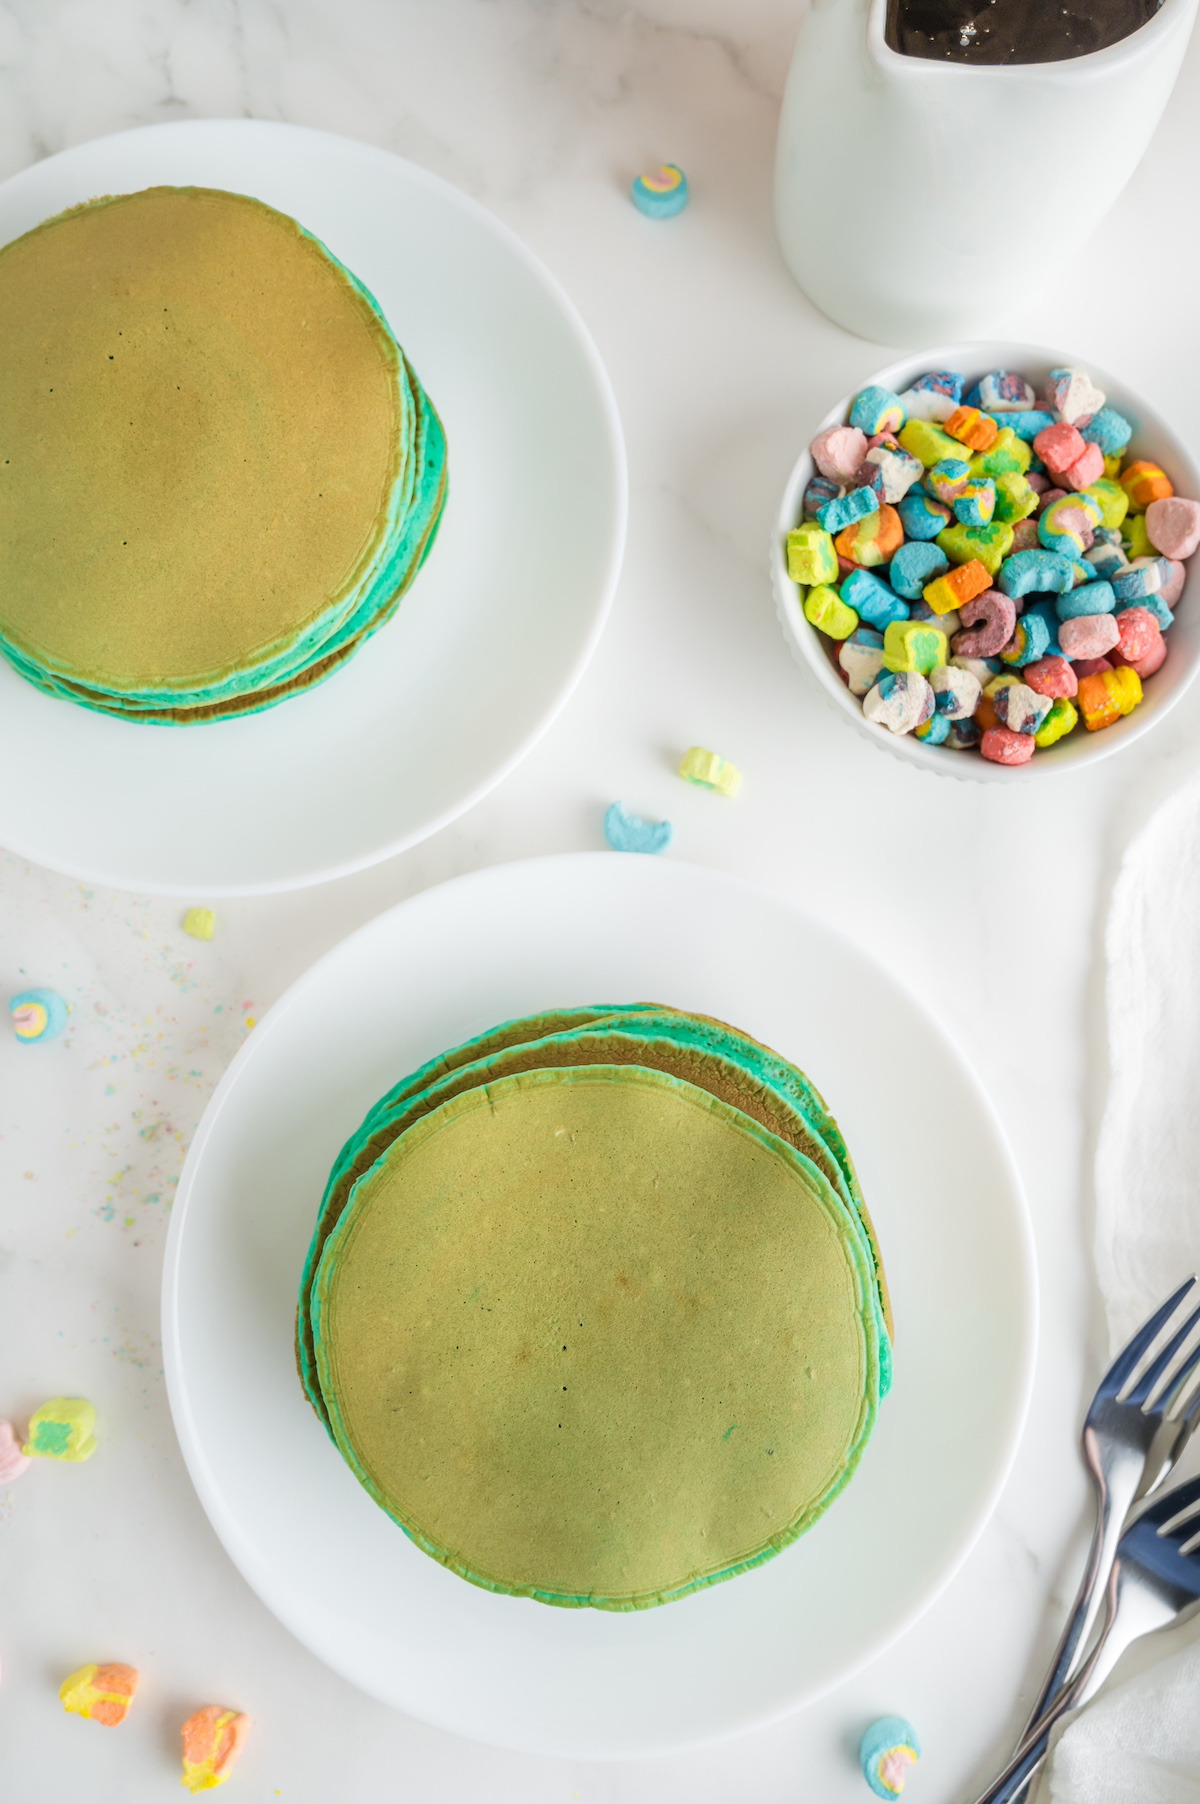 Cooked green pancakes on a plate